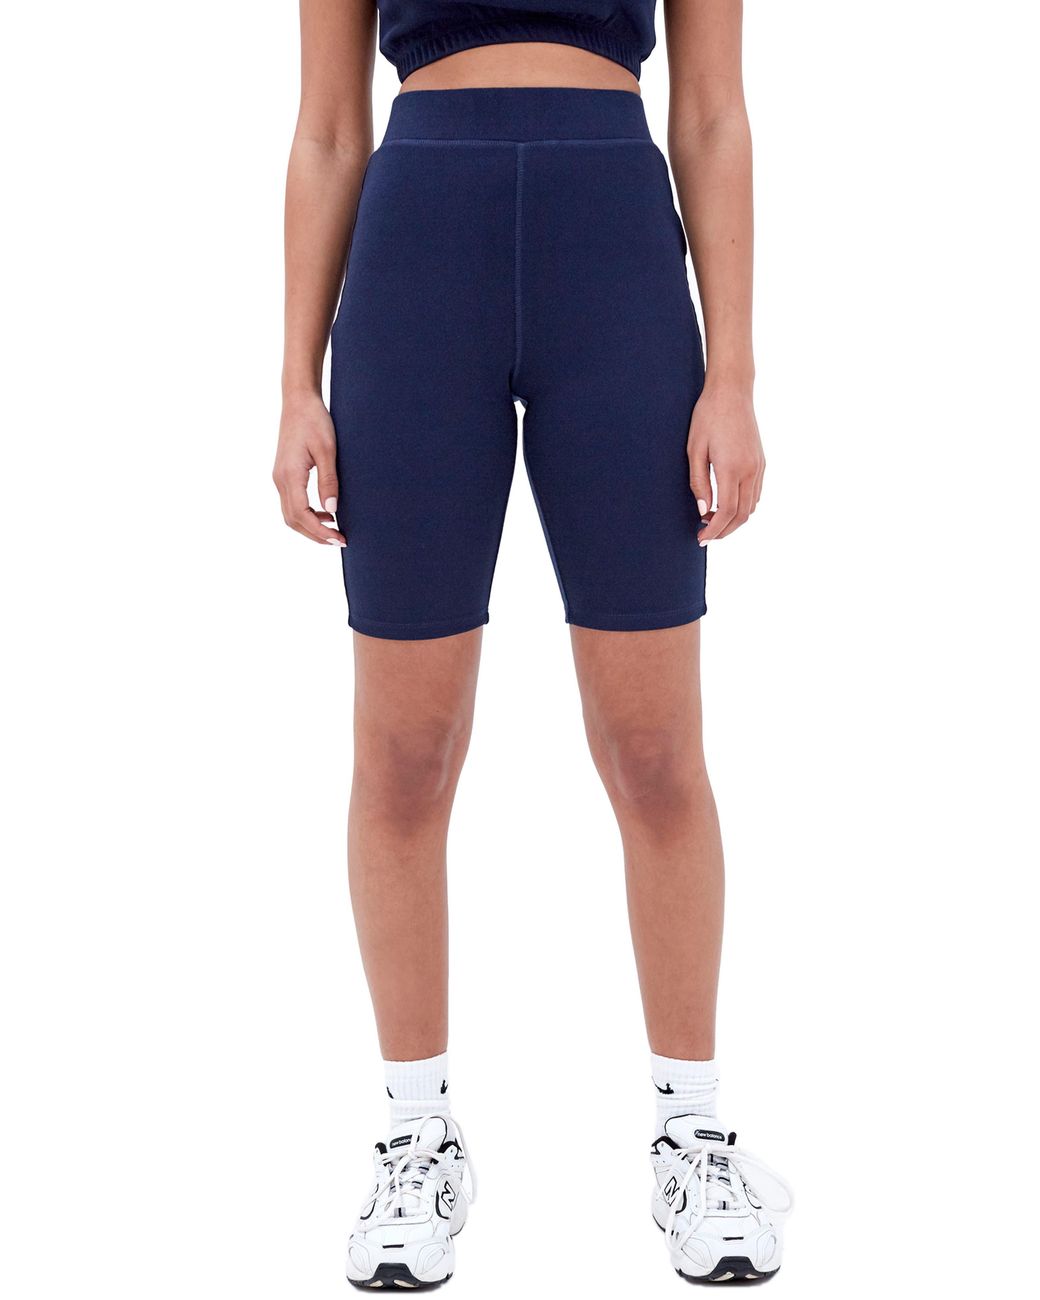 4th & Reckless Sia Bike Shorts in Navy (Blue) - Lyst